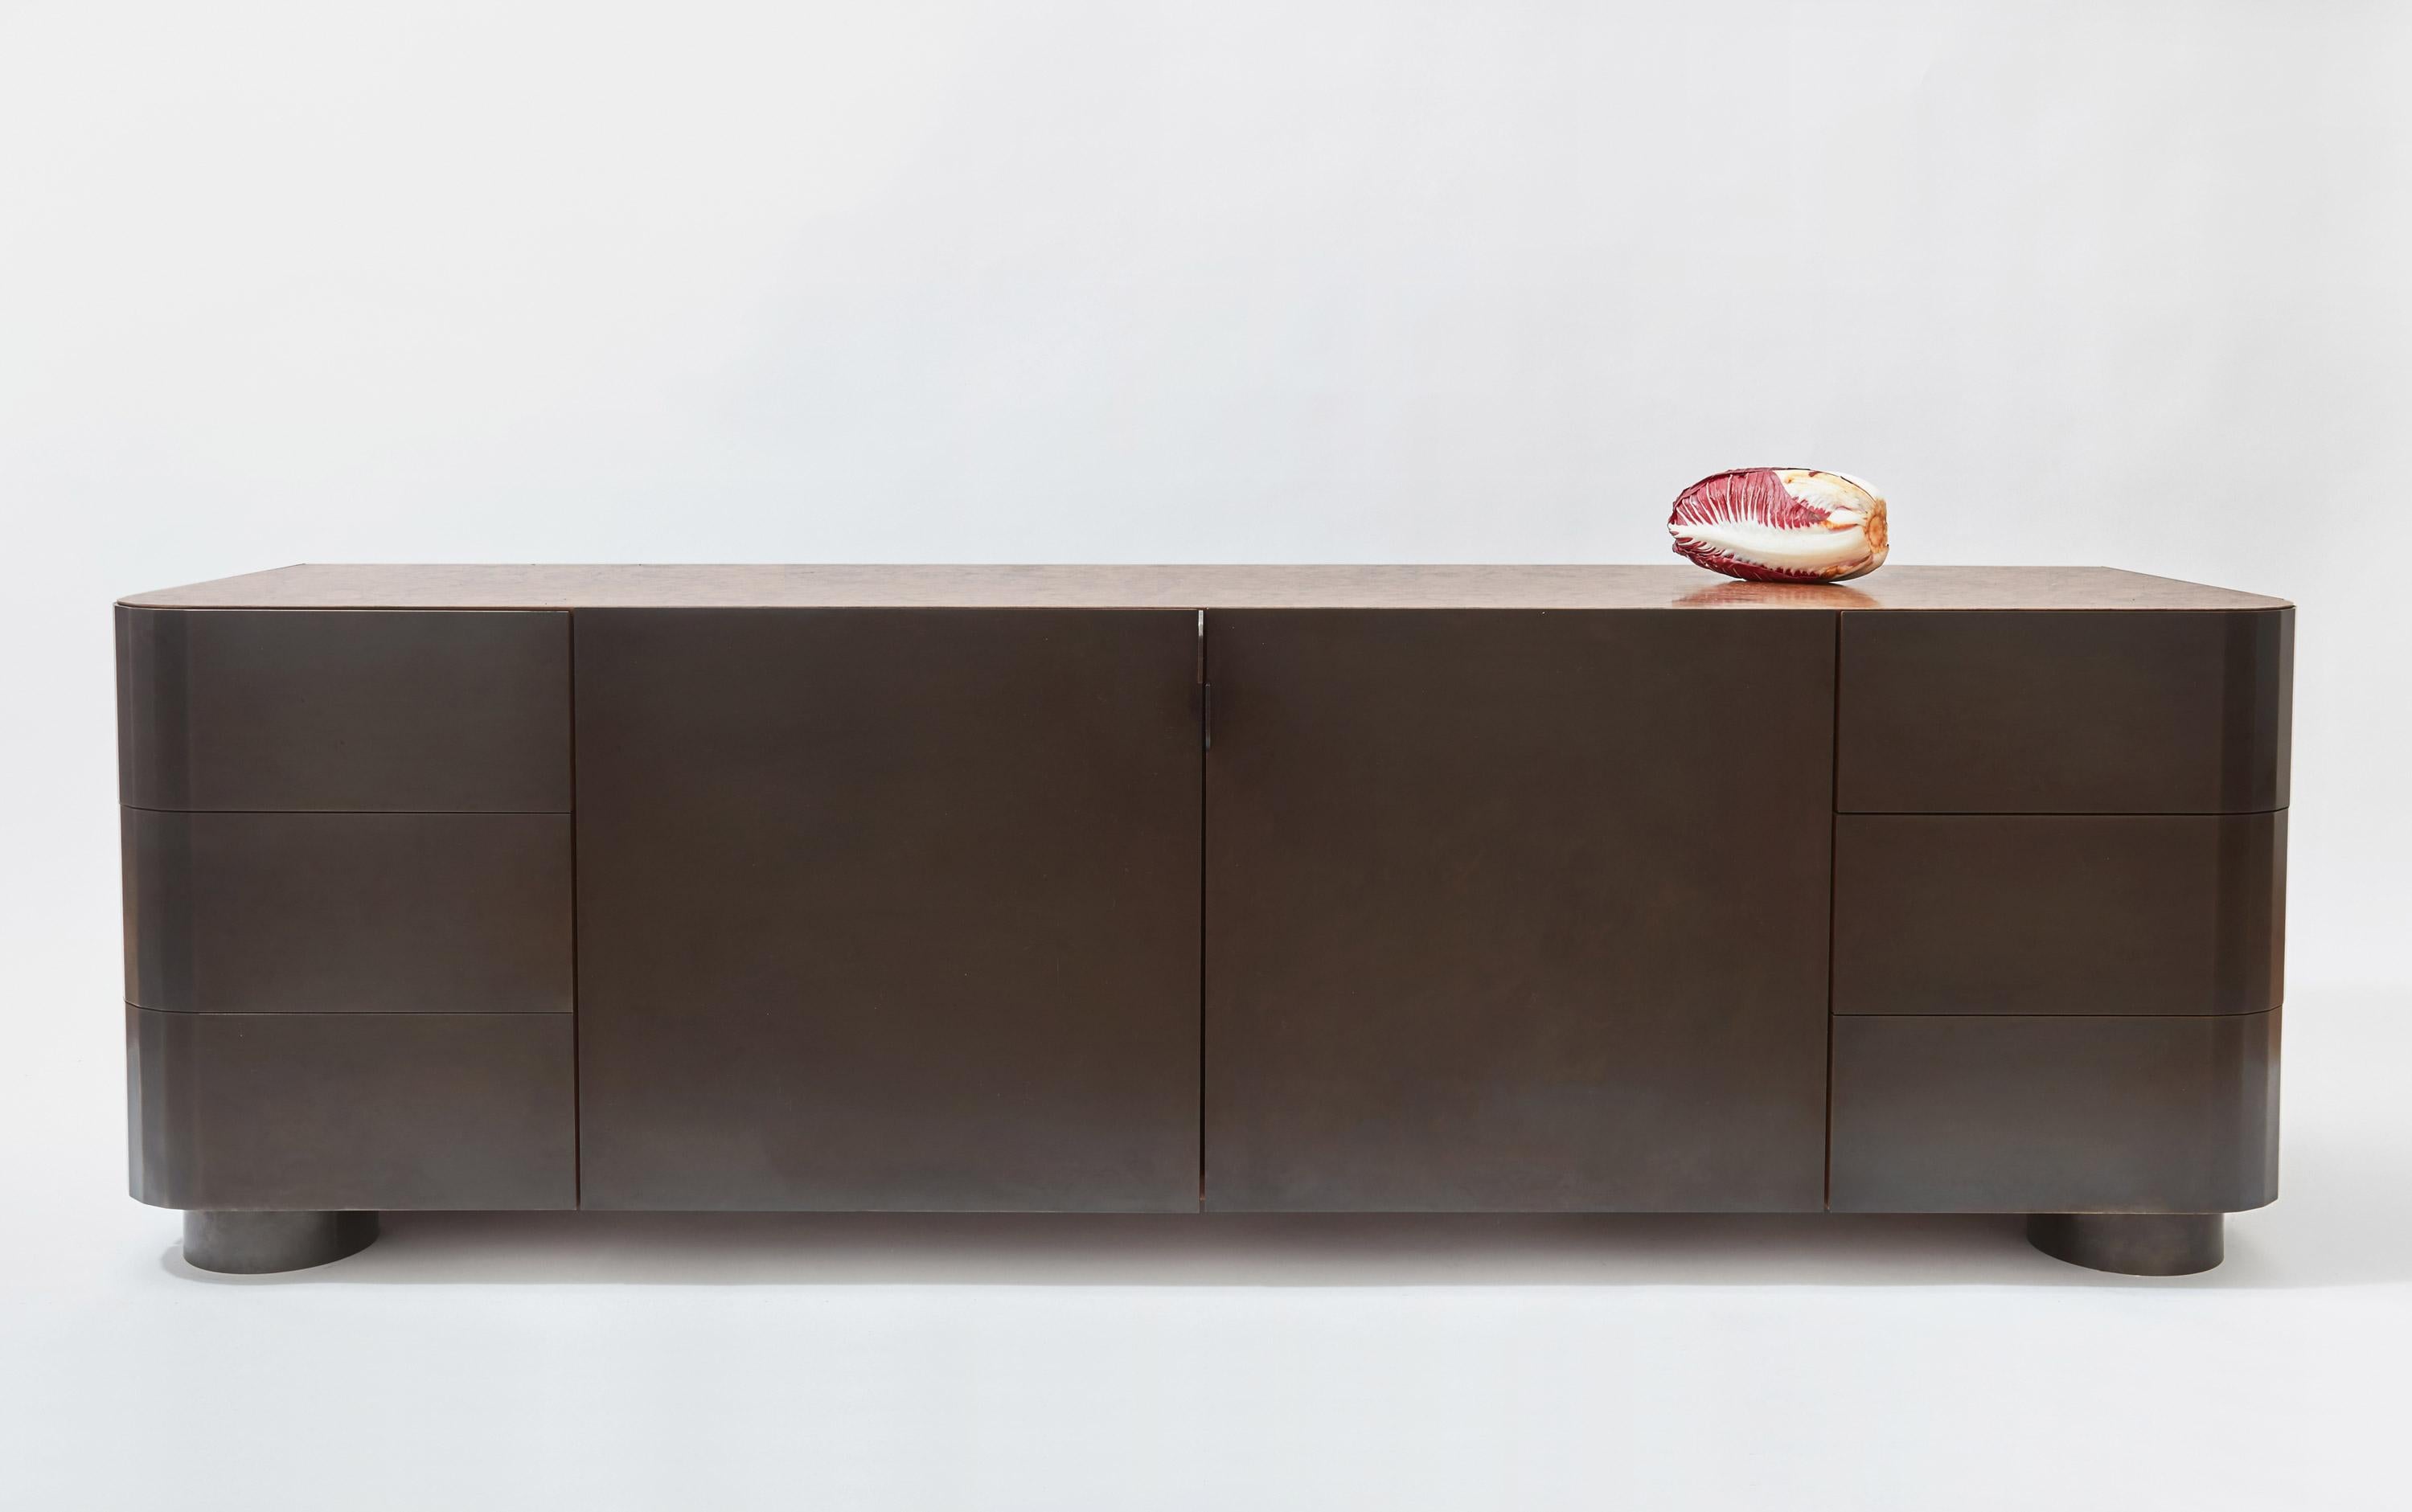 Monolithic Credenza / Sideboard from Black patinated Brass & Burl Walnut Wood In New Condition For Sale In London, GB